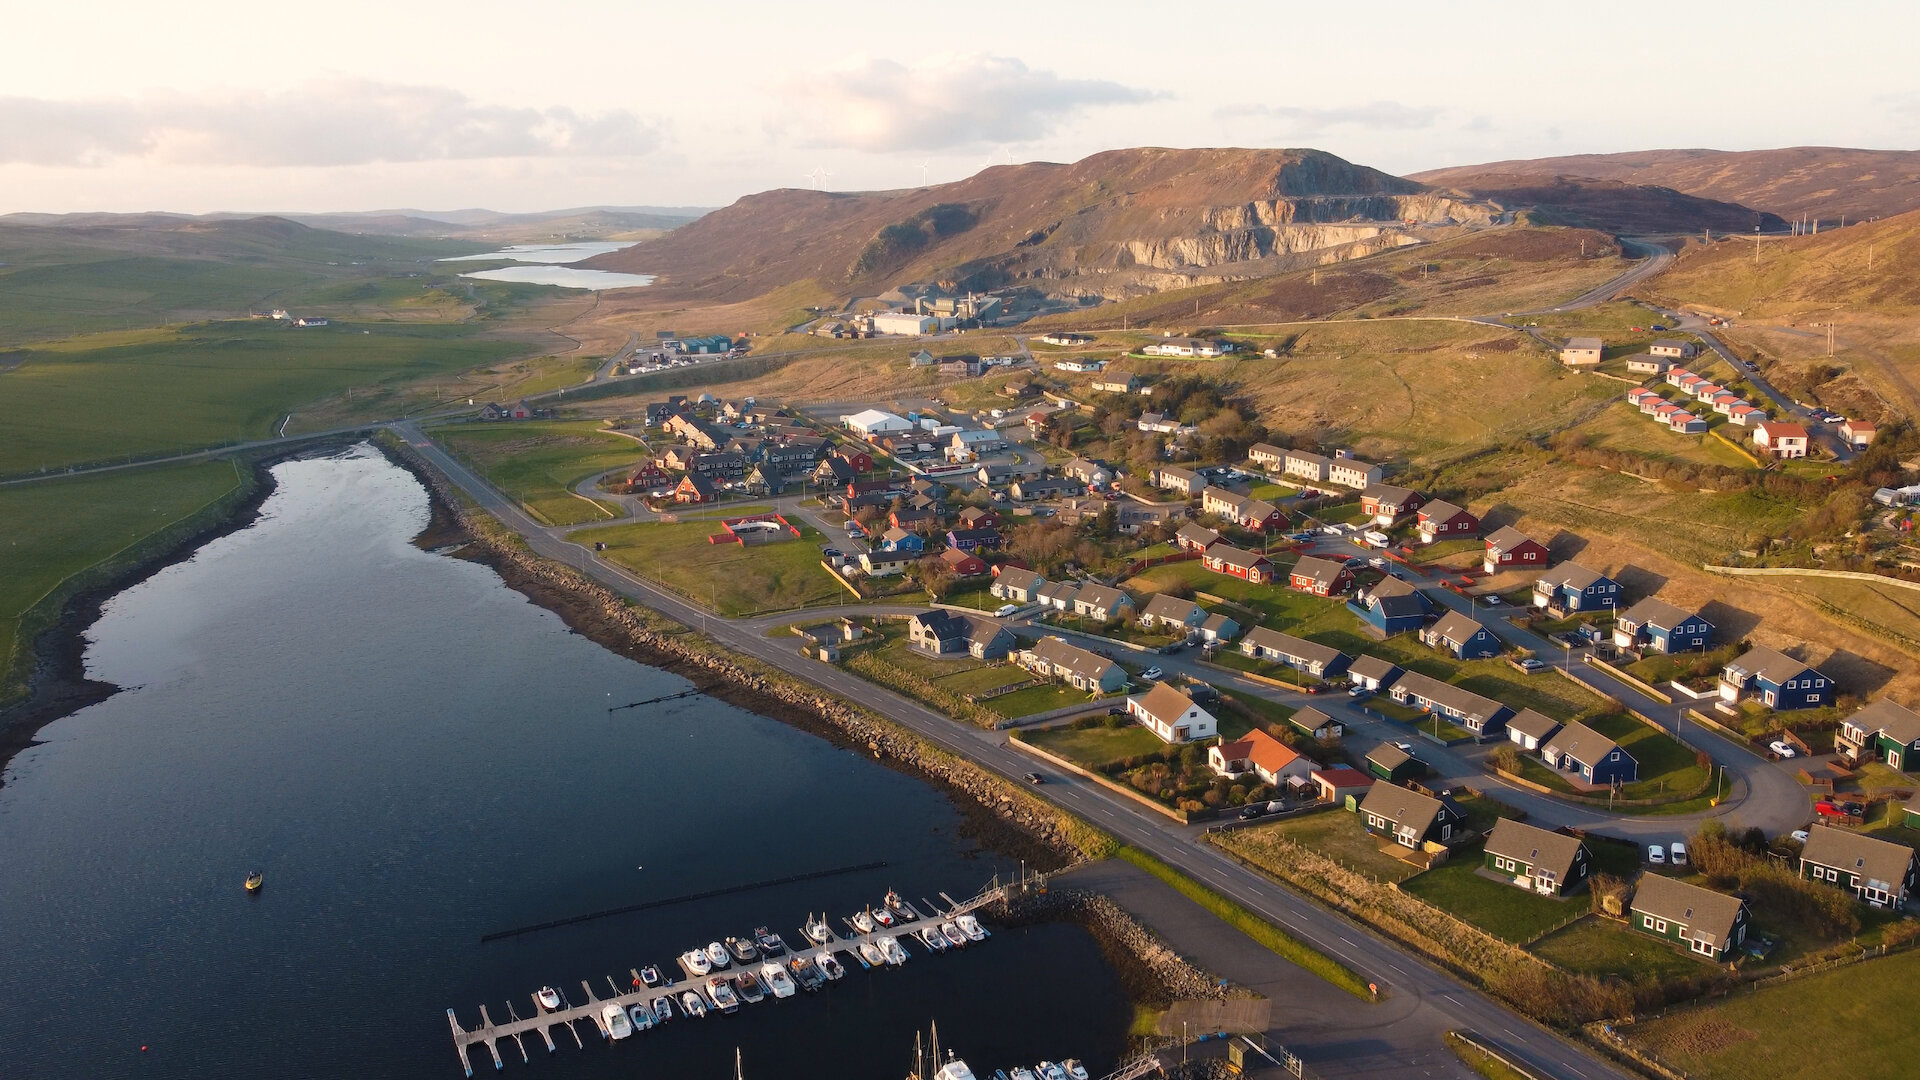 Shetland's vibrant communities and open landscapes make the islands a special place.